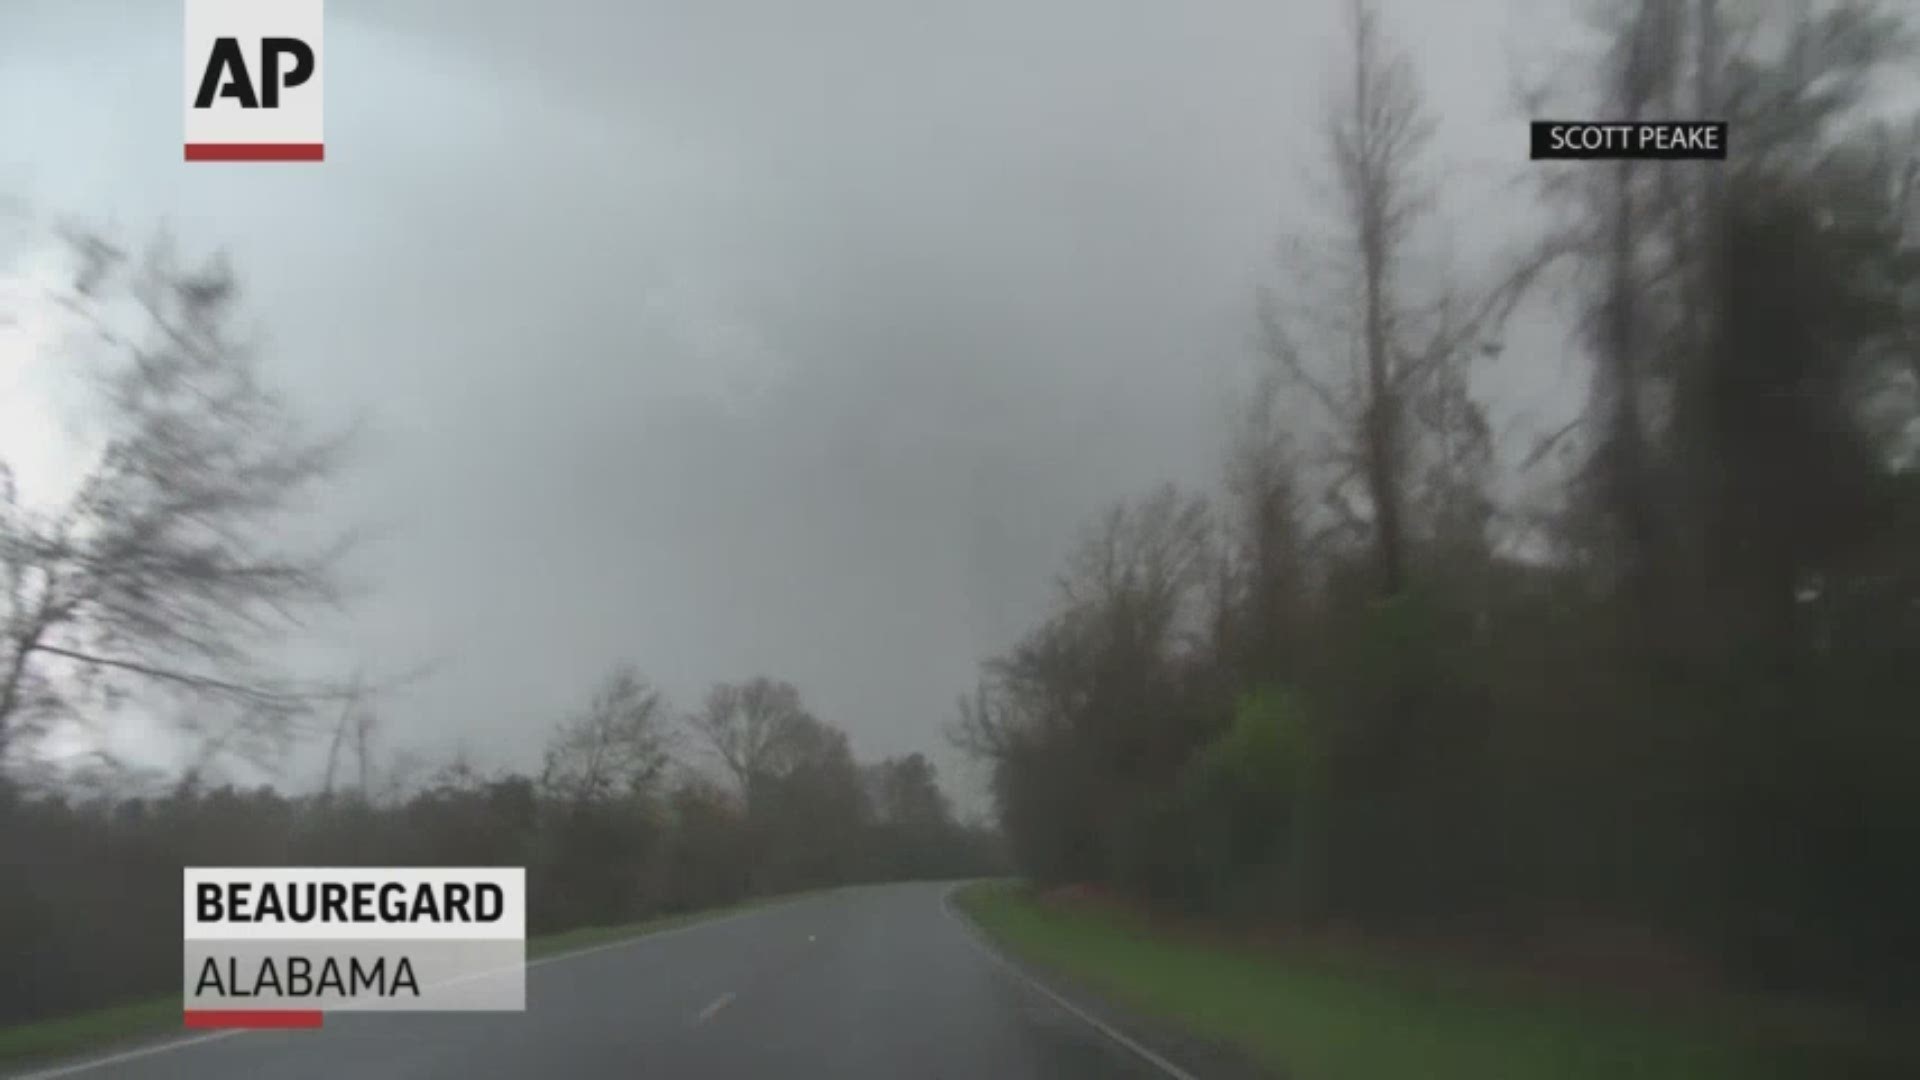 A video shot by storm chaser Scott Peake shows the moment the tornado hit the rural community of Beauregard in Alabama on Sunday, March 3.